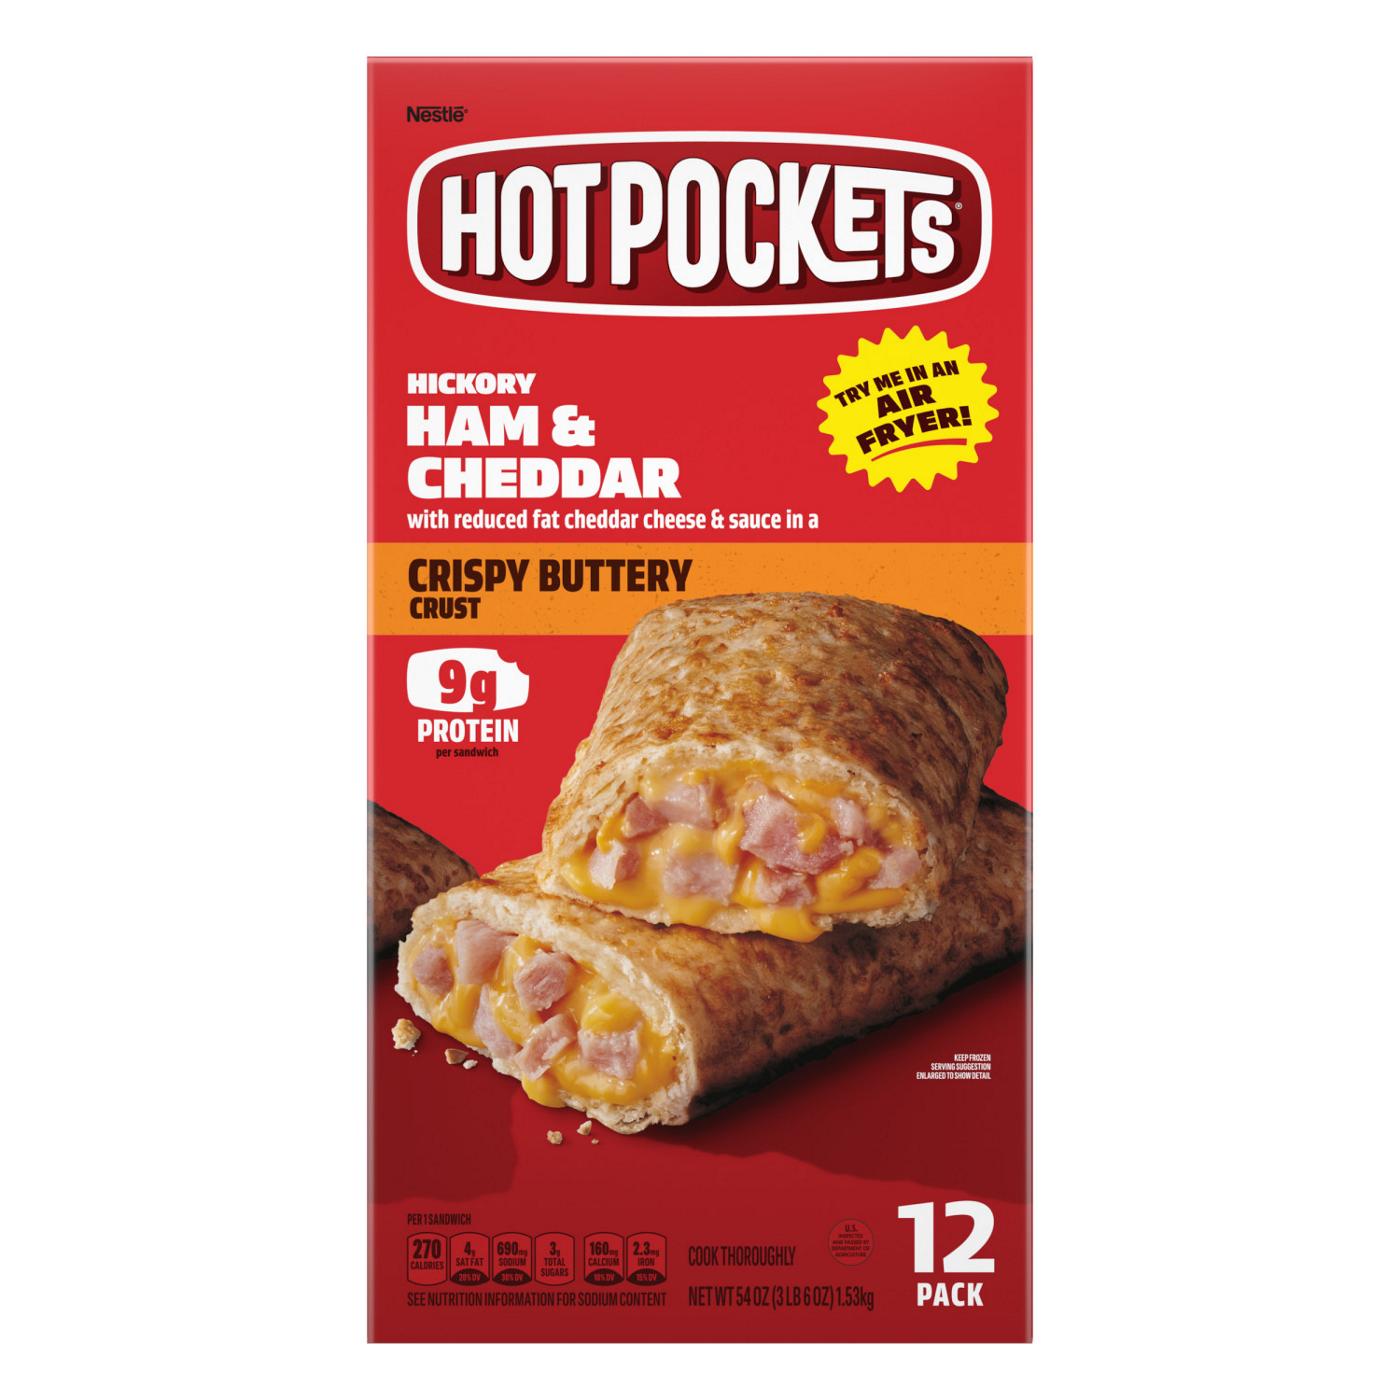 Hot Pockets Hickory Ham & Cheddar Frozen Sandwiches - Crispy Buttery Crust; image 1 of 5